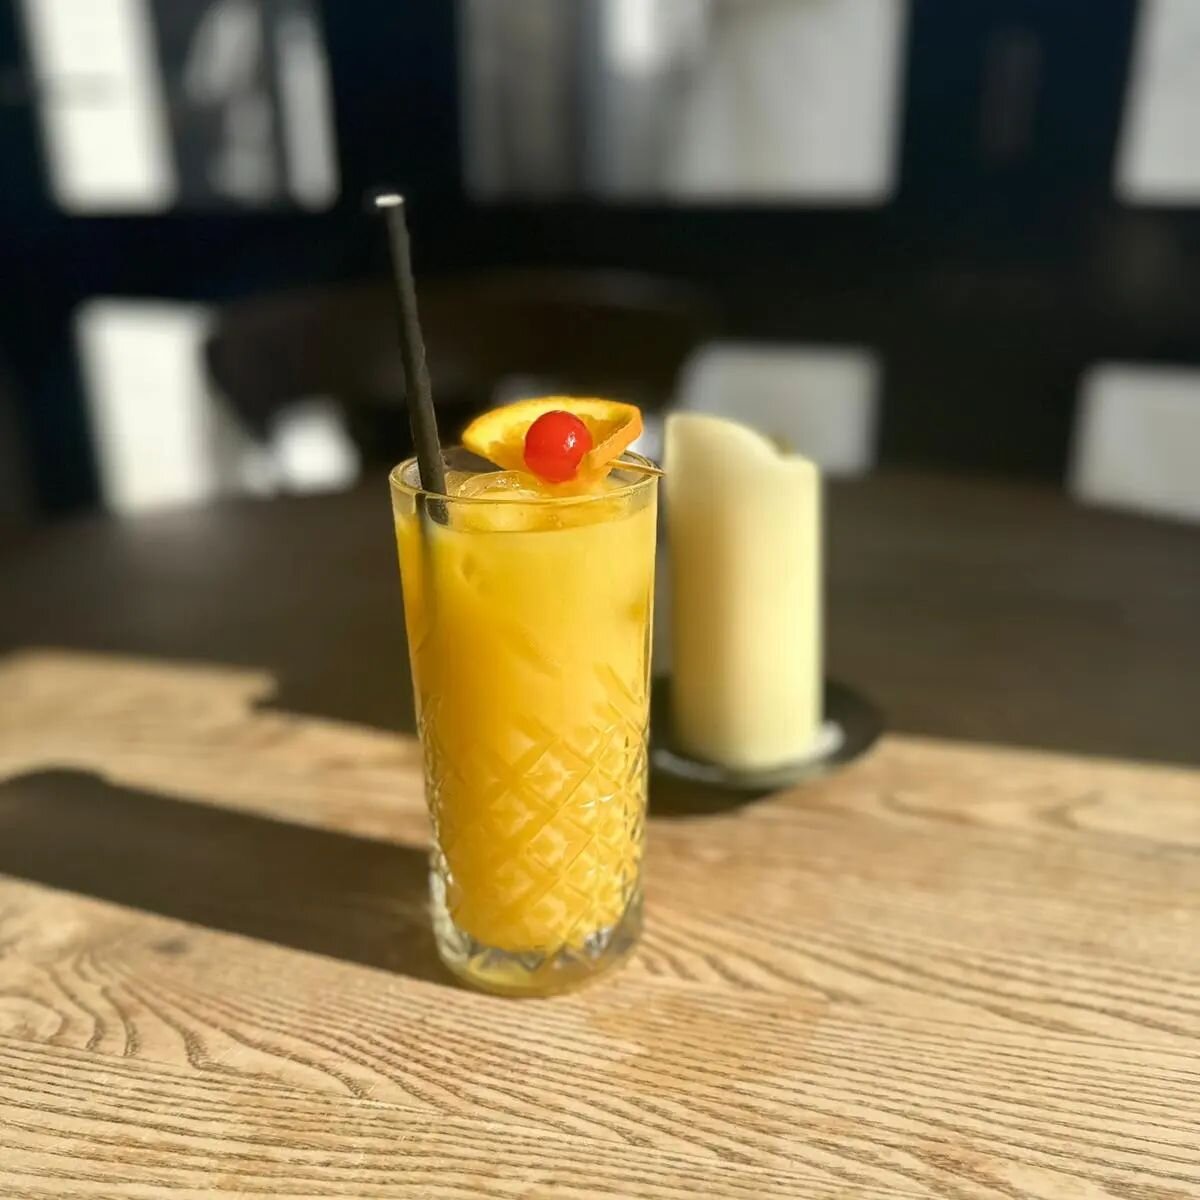 This Friday we are taking a trip back to the 70's with the Harvey Wallbanger in our cocktail happy hour. Easy to drink but take heed of the name!

Tonight we are having our first music night hosted by @anouskaassisi a great local artist.